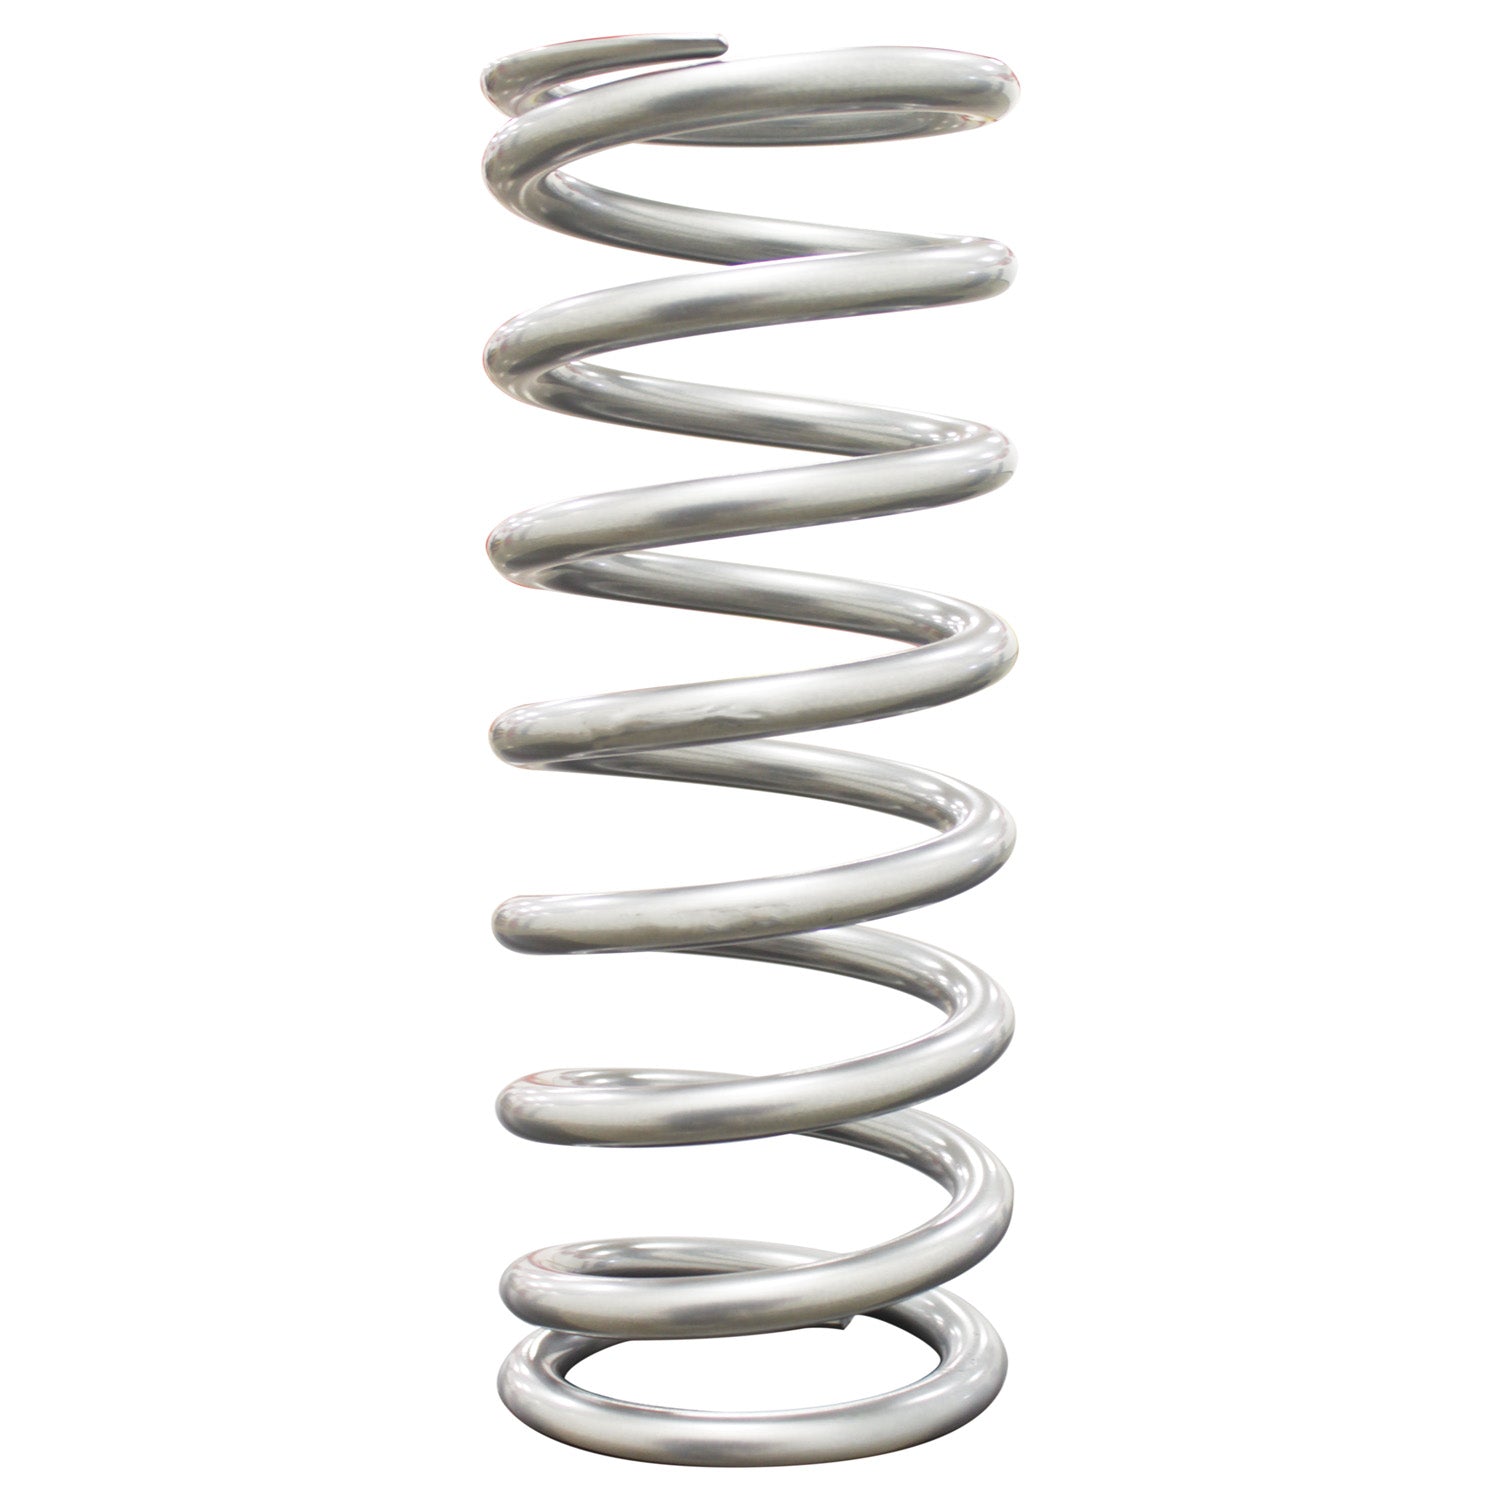 QA1 10HTSF350 Spring, Cr-Si HT High Travel 3.570 inch 10 inch X 350 Lbs/In. Tapered Silver PC